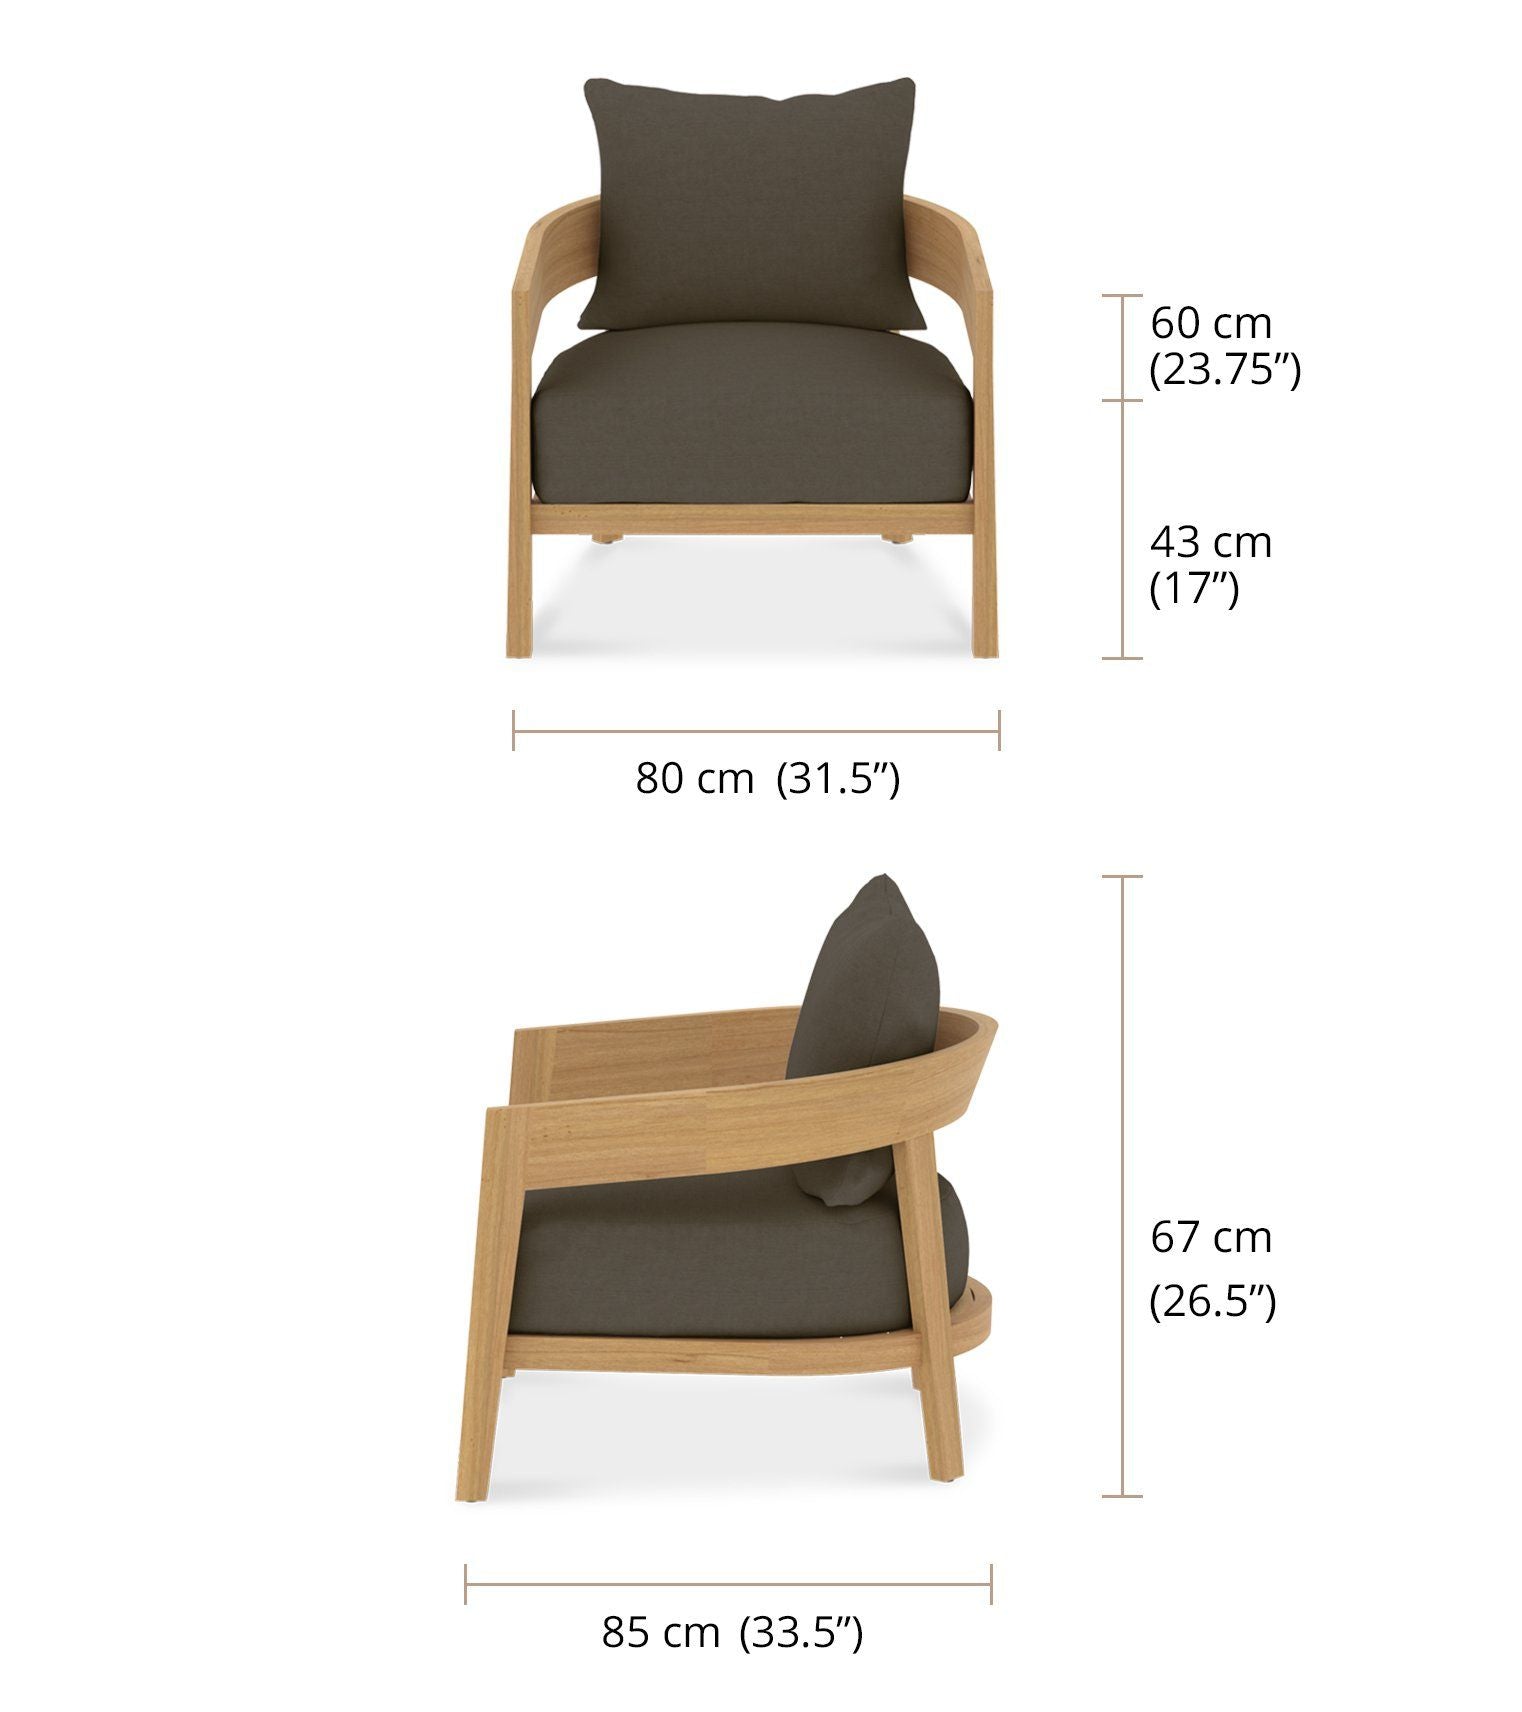 The Windsor Teak Lounge Chair - Dimensions